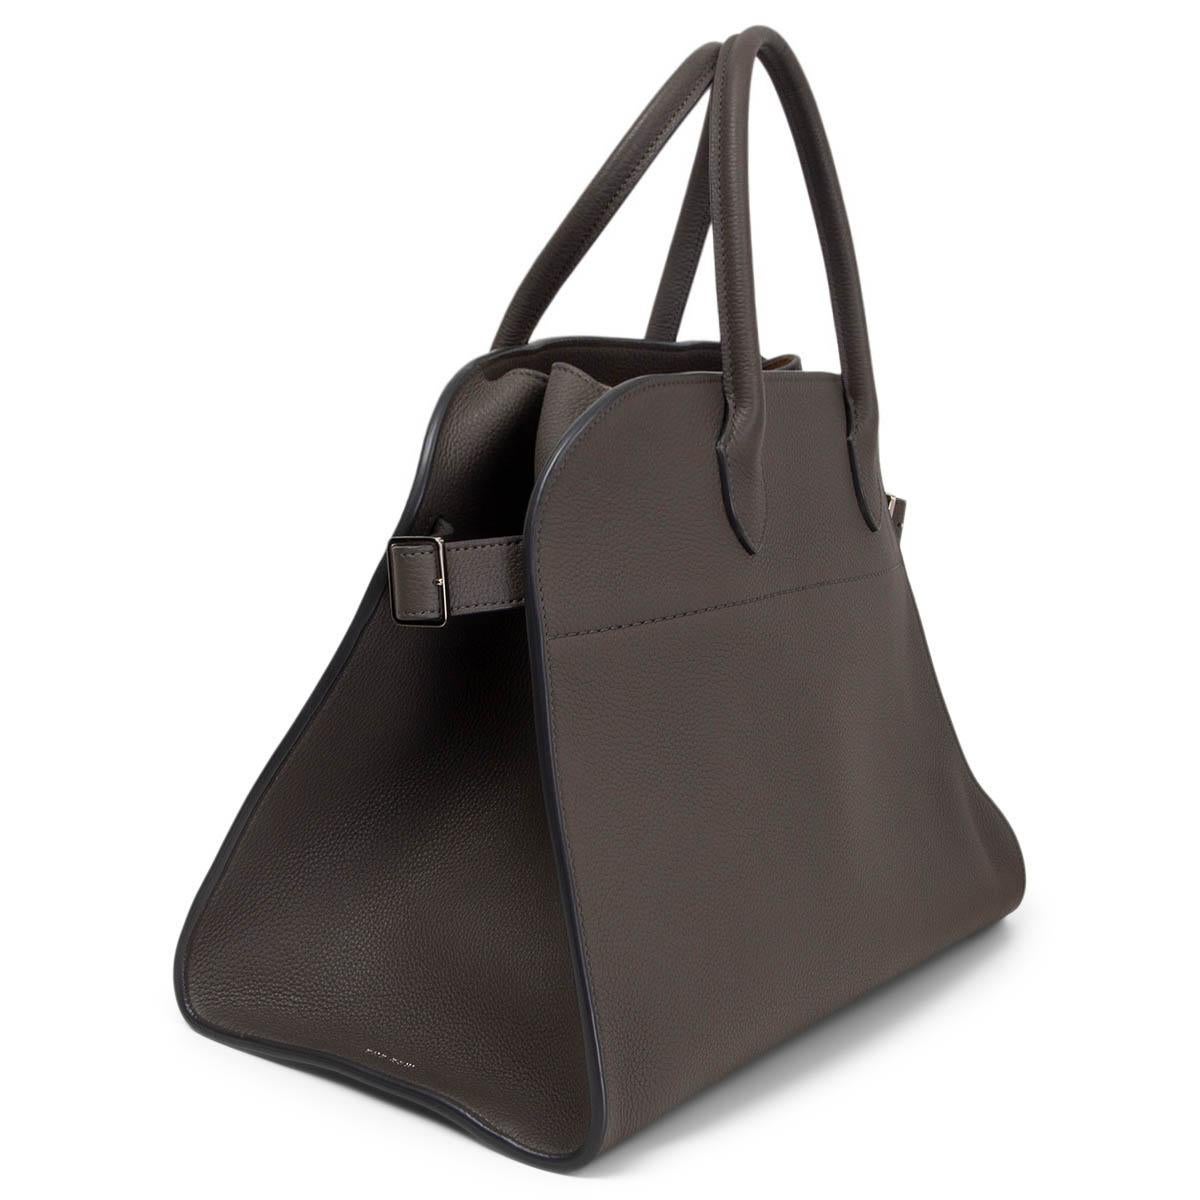 100% authentic The Row Margaux 15 tote is an elegant everyday companion that's made from fine grained ash grey leather. Comes with double top handles and belted panels at the sides featuring silver-tone hardware. Internal details: suede lining,